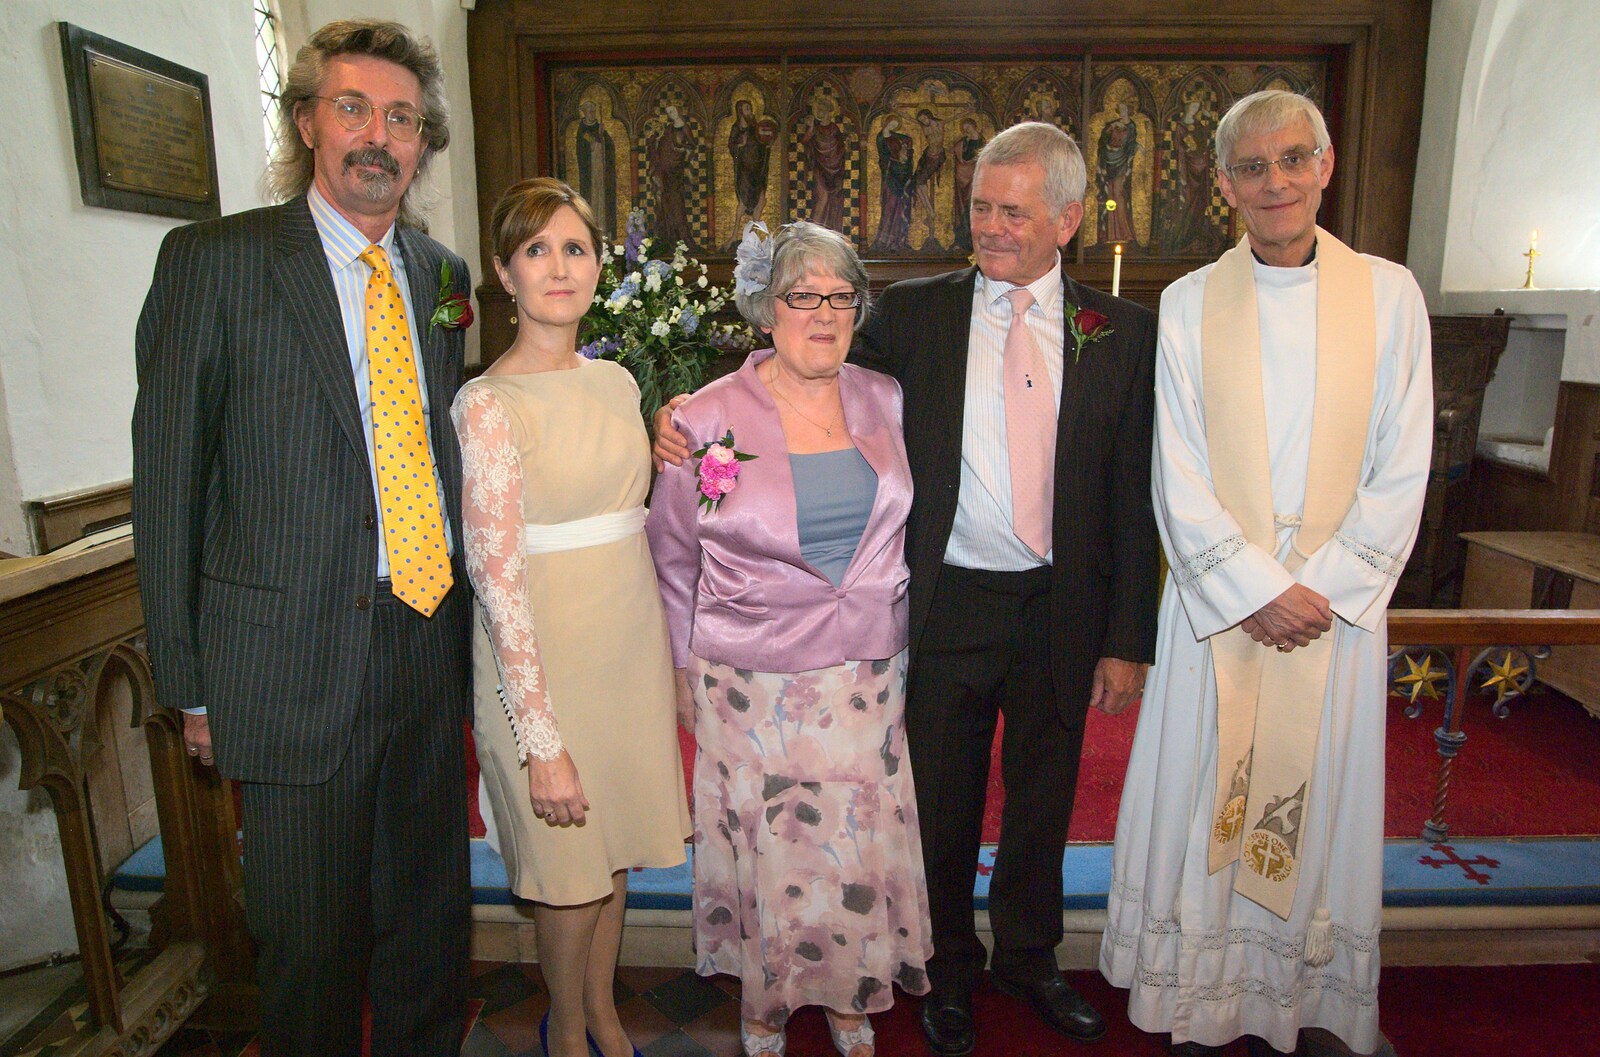 Rob, Wilma, the witnesses and the vicar from Rob and Wilma's Wedding, Thornham and Thrandeston, Suffolk - 6th August 2011